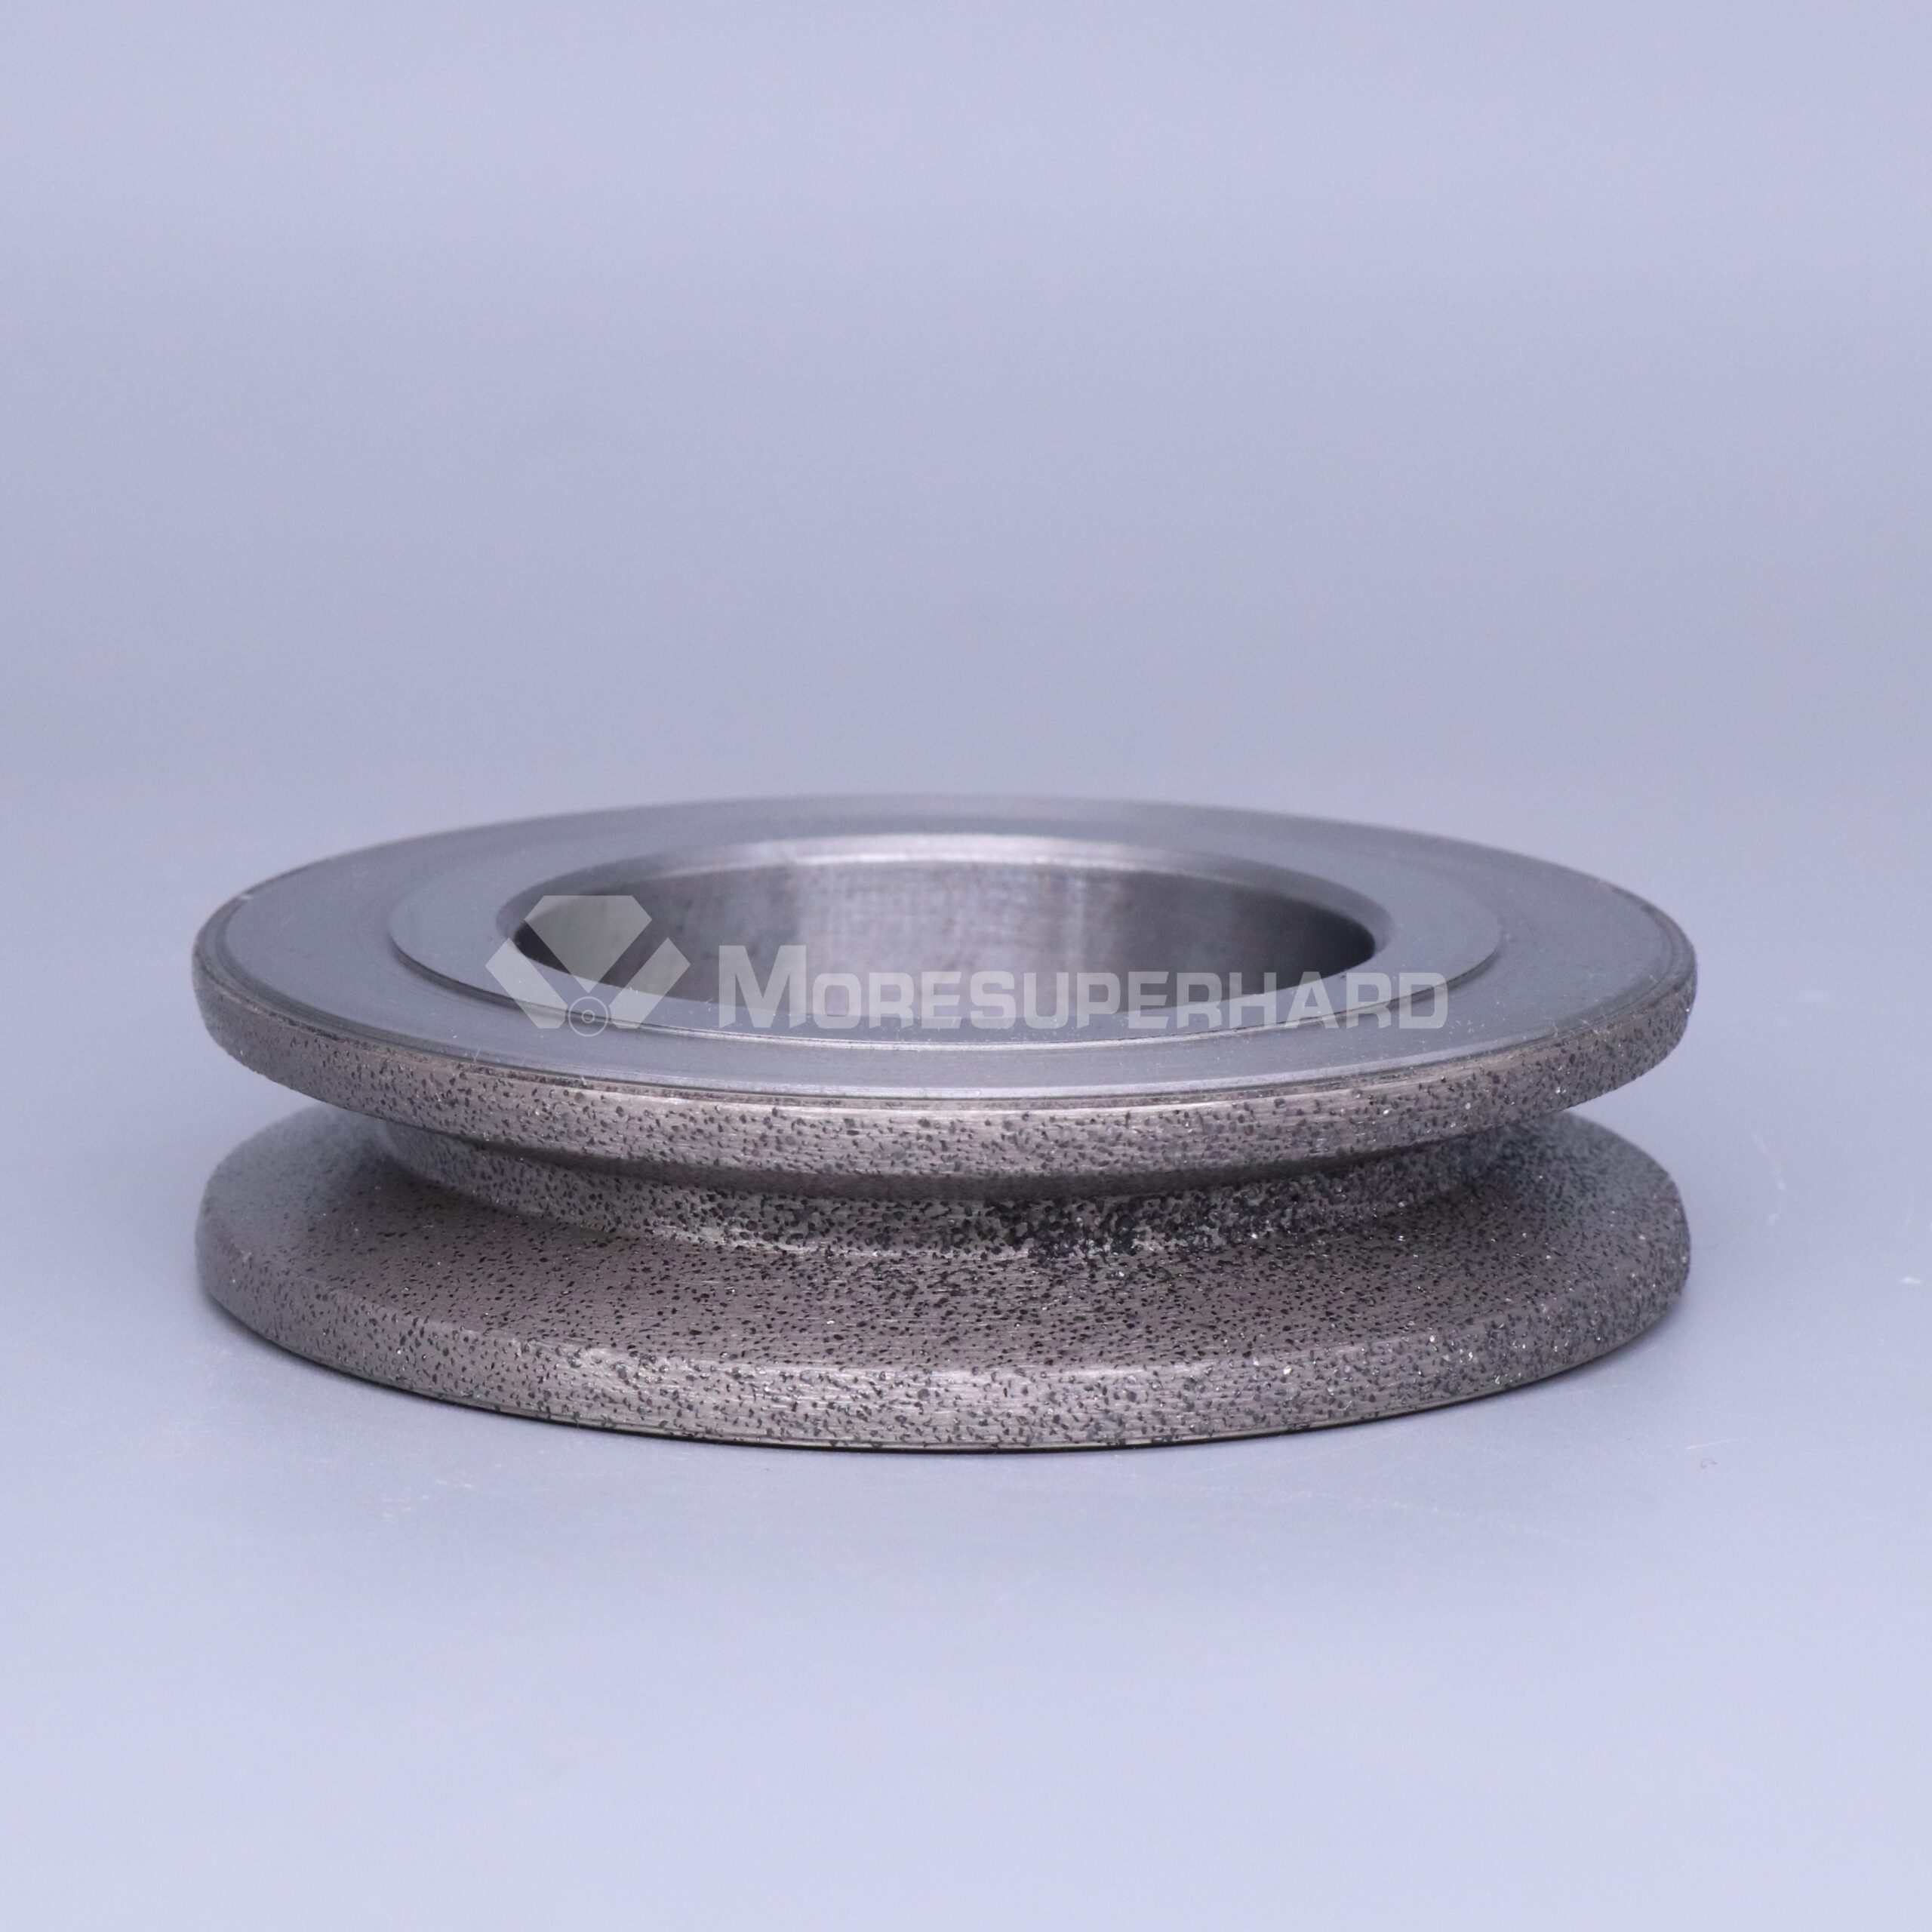 Electroplated diamond dressers for grinding wheels in New energy vehicle motor shafts